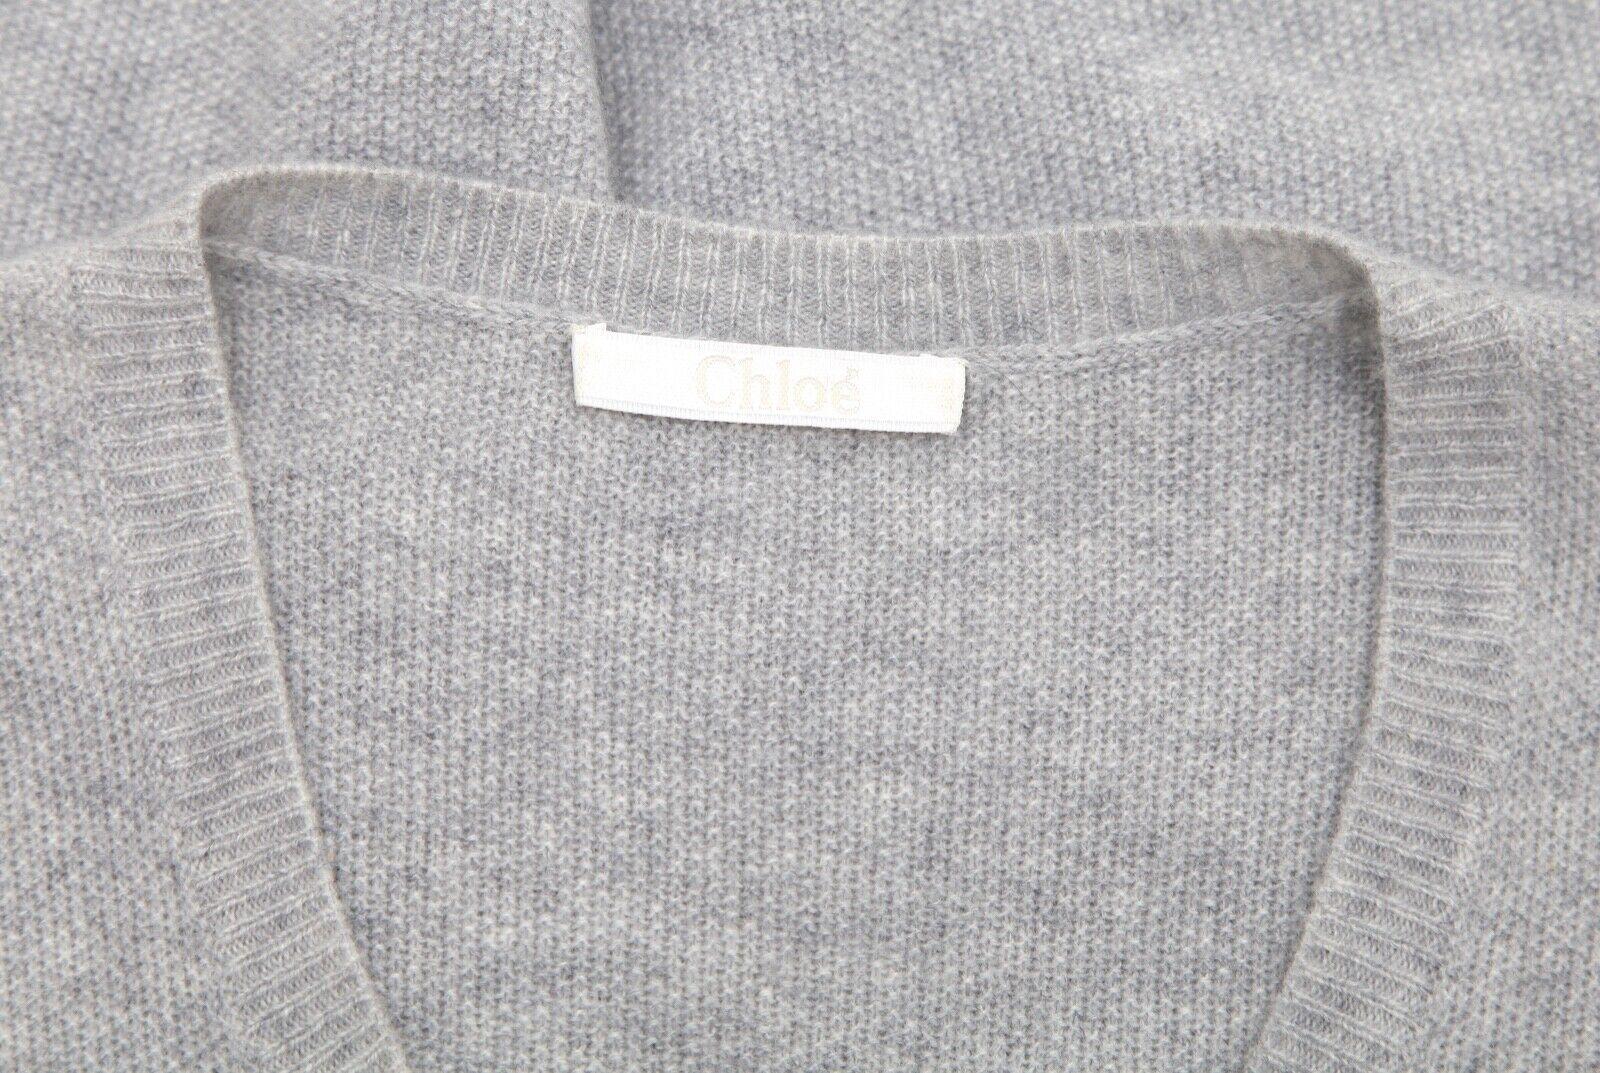 CHLOE Grey Cardigan Sweater Knit Cashmere Long Sleeve Snap Closure Sz XS For Sale 3